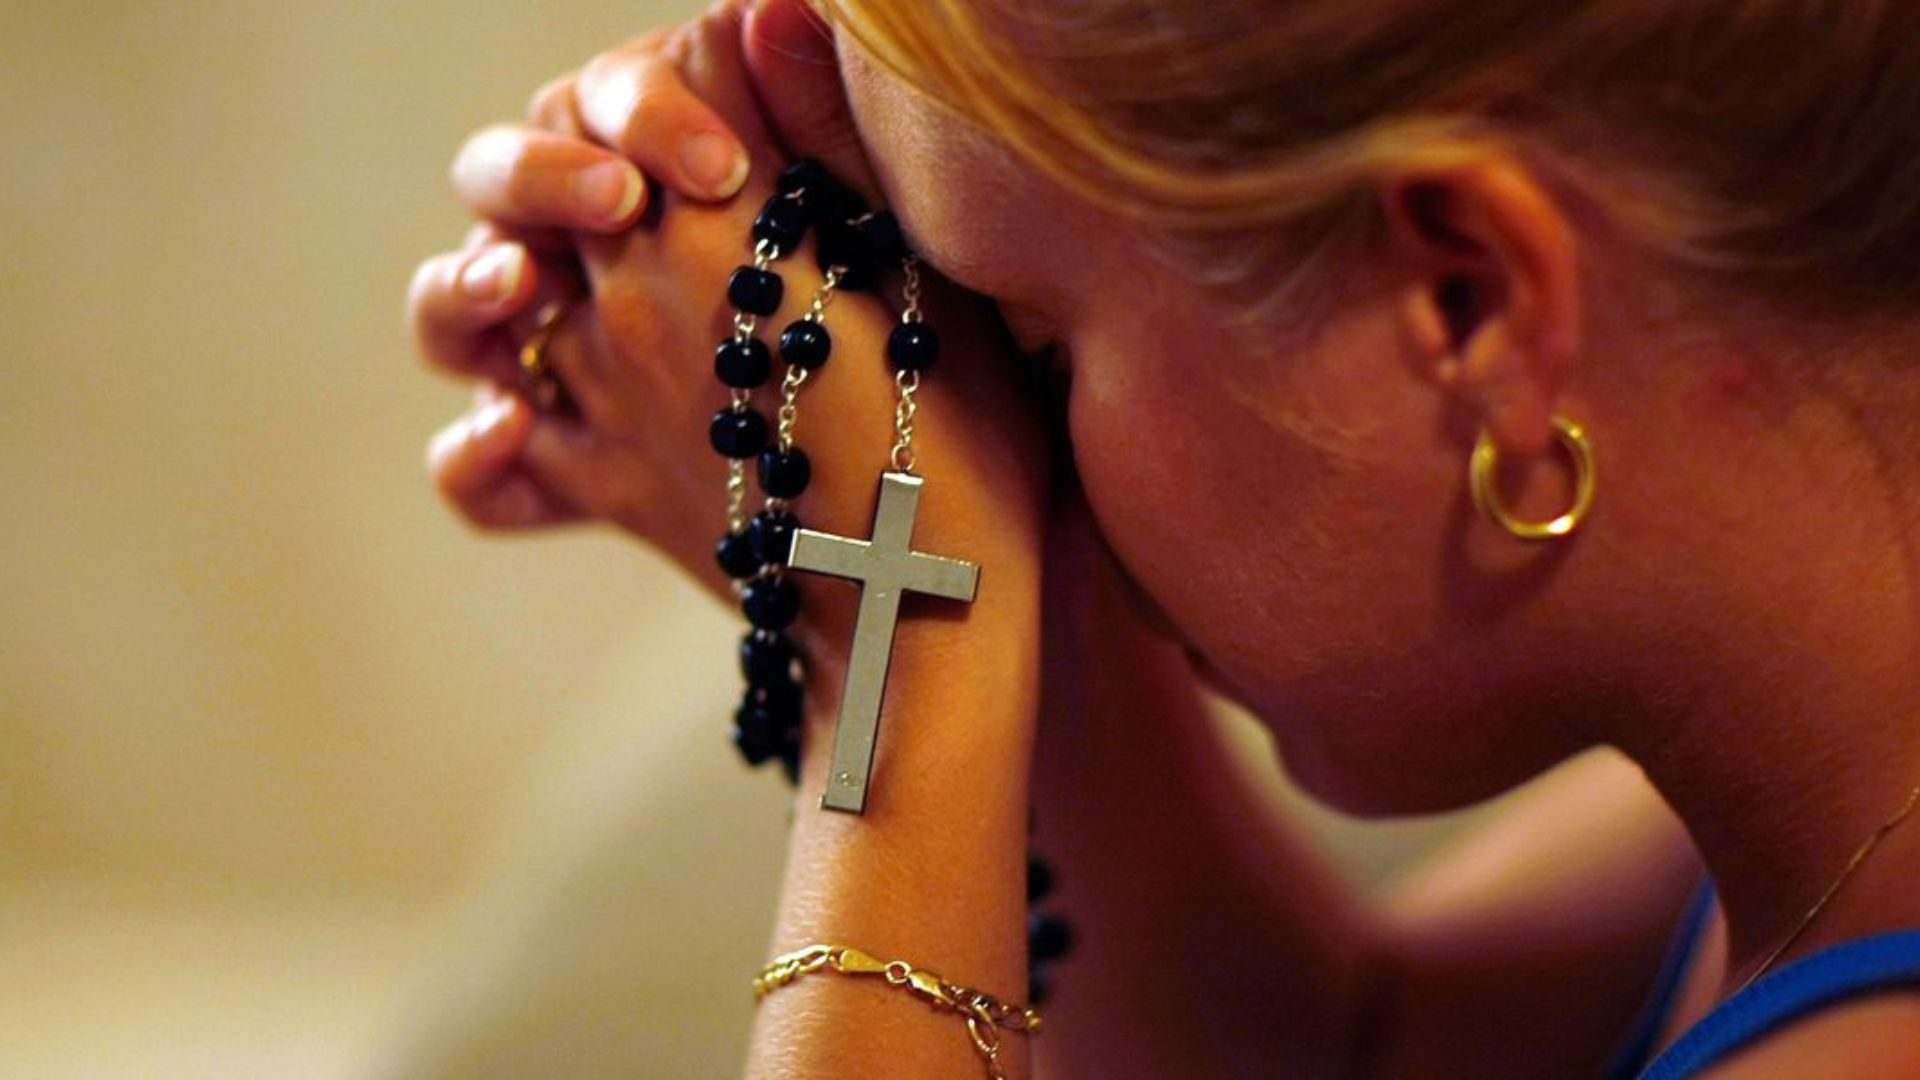 A Woman Praying While Holding Cross Necklace